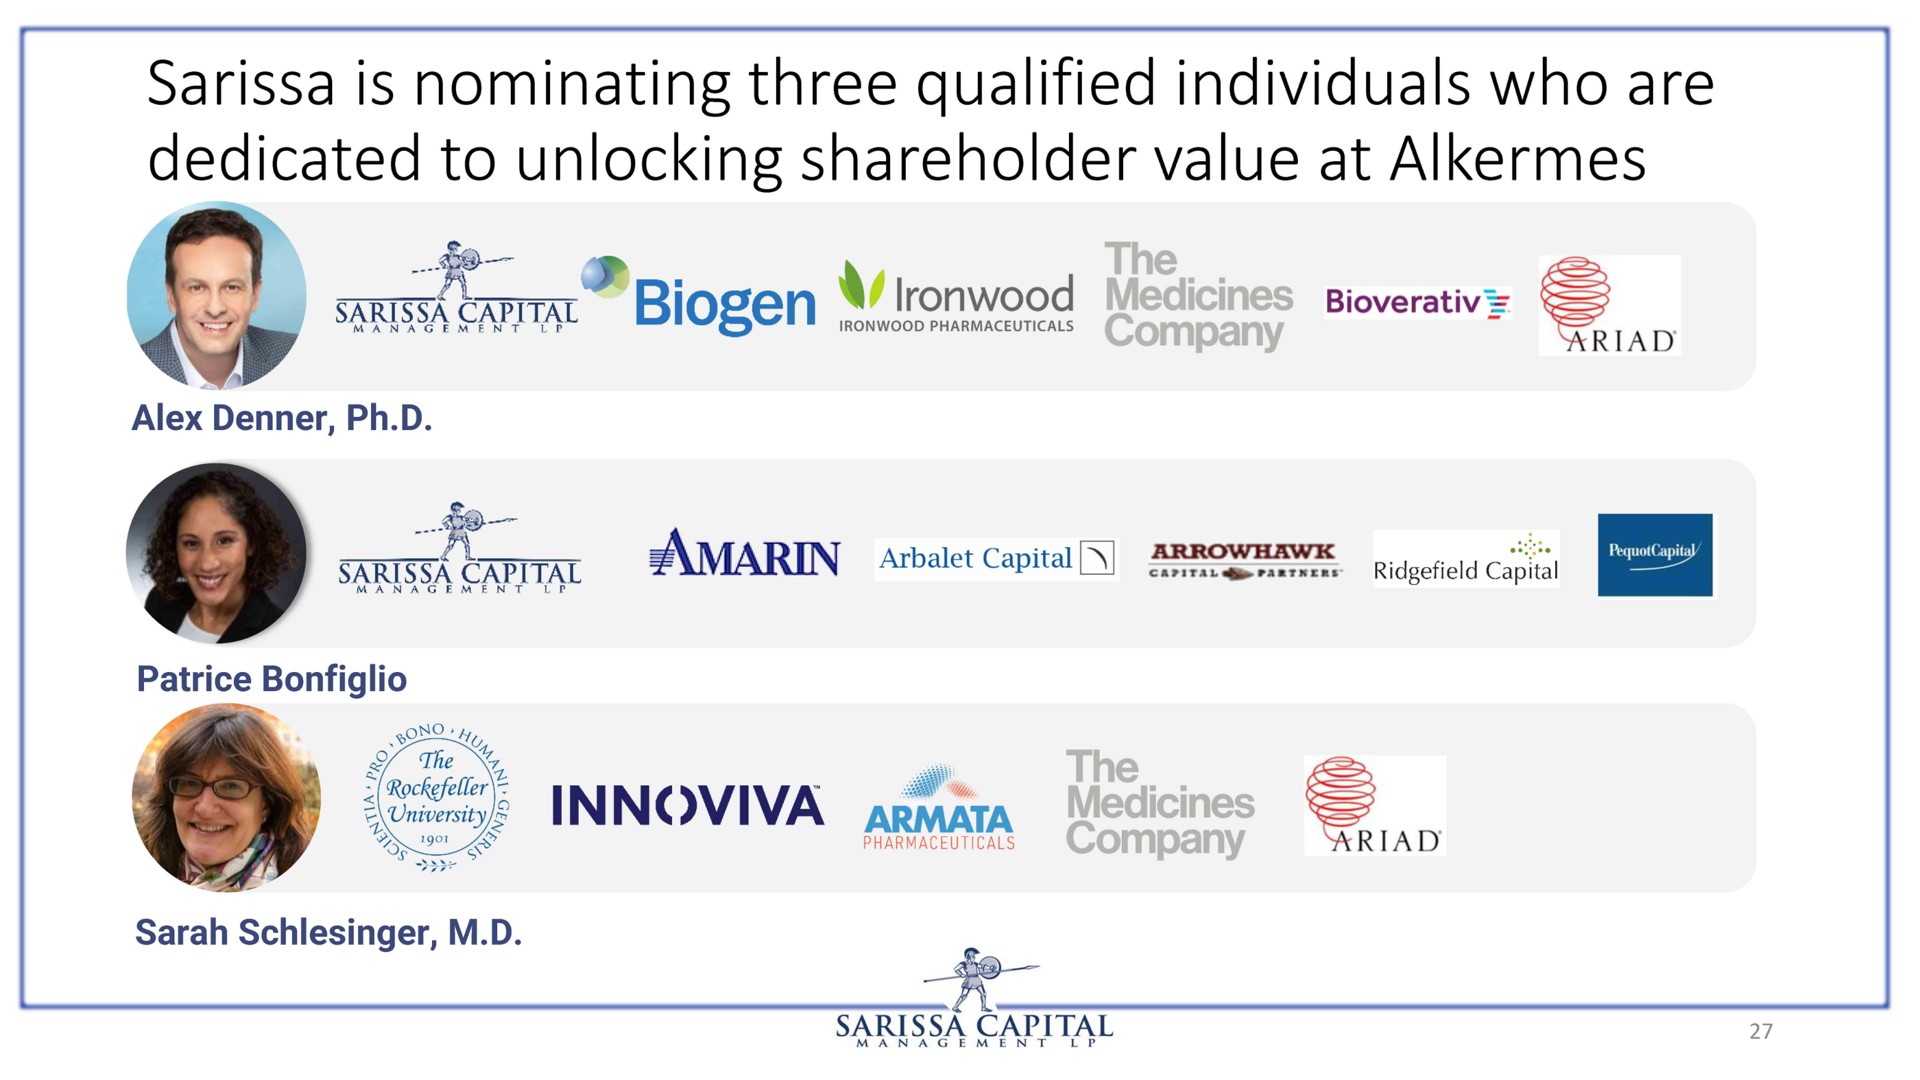 is nominating three qualified individuals who are dedicated to unlocking shareholder value at alkermes | Sarissa Capital